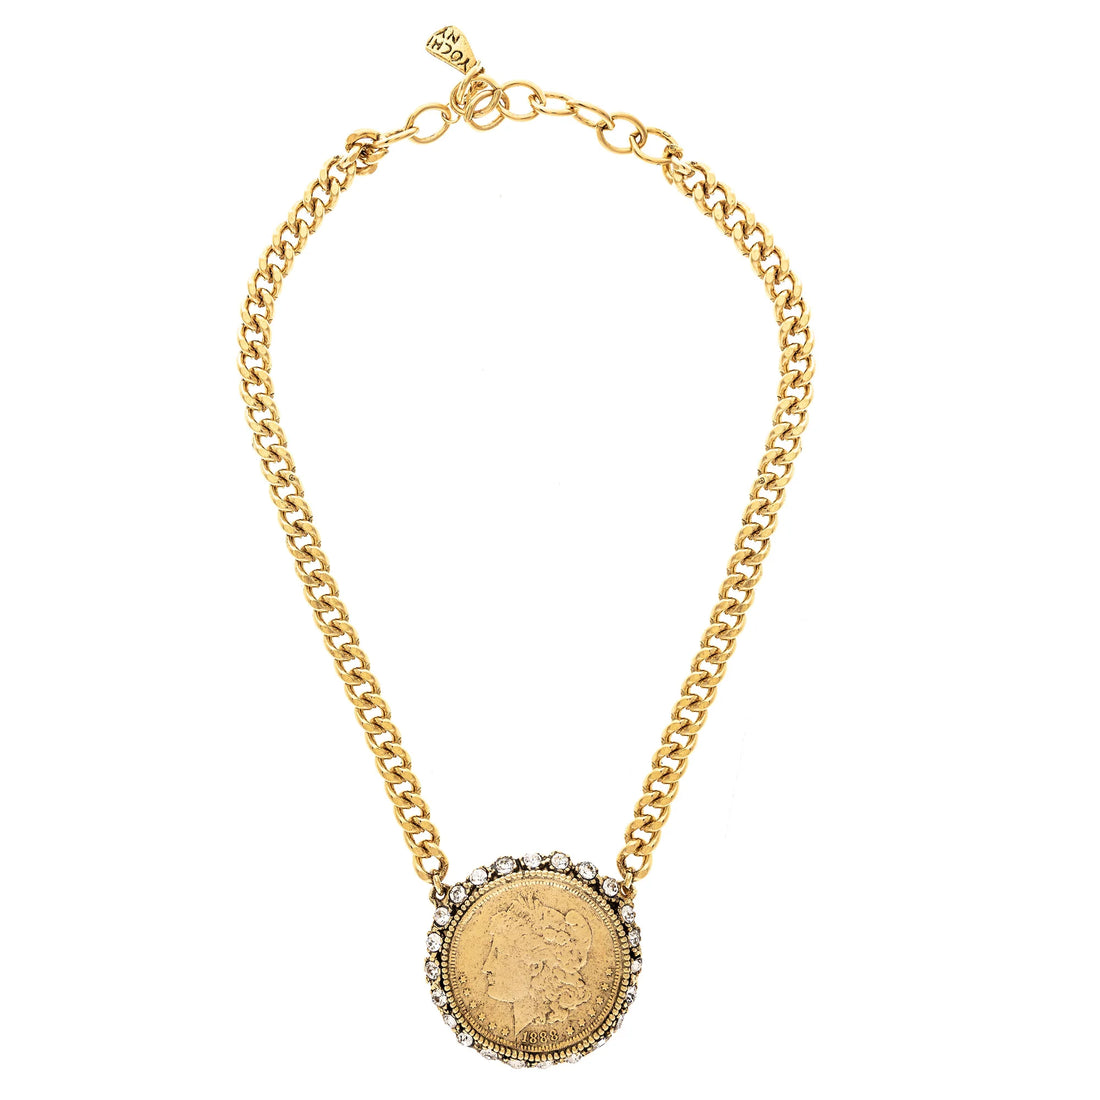 BLING COIN NECKLACE